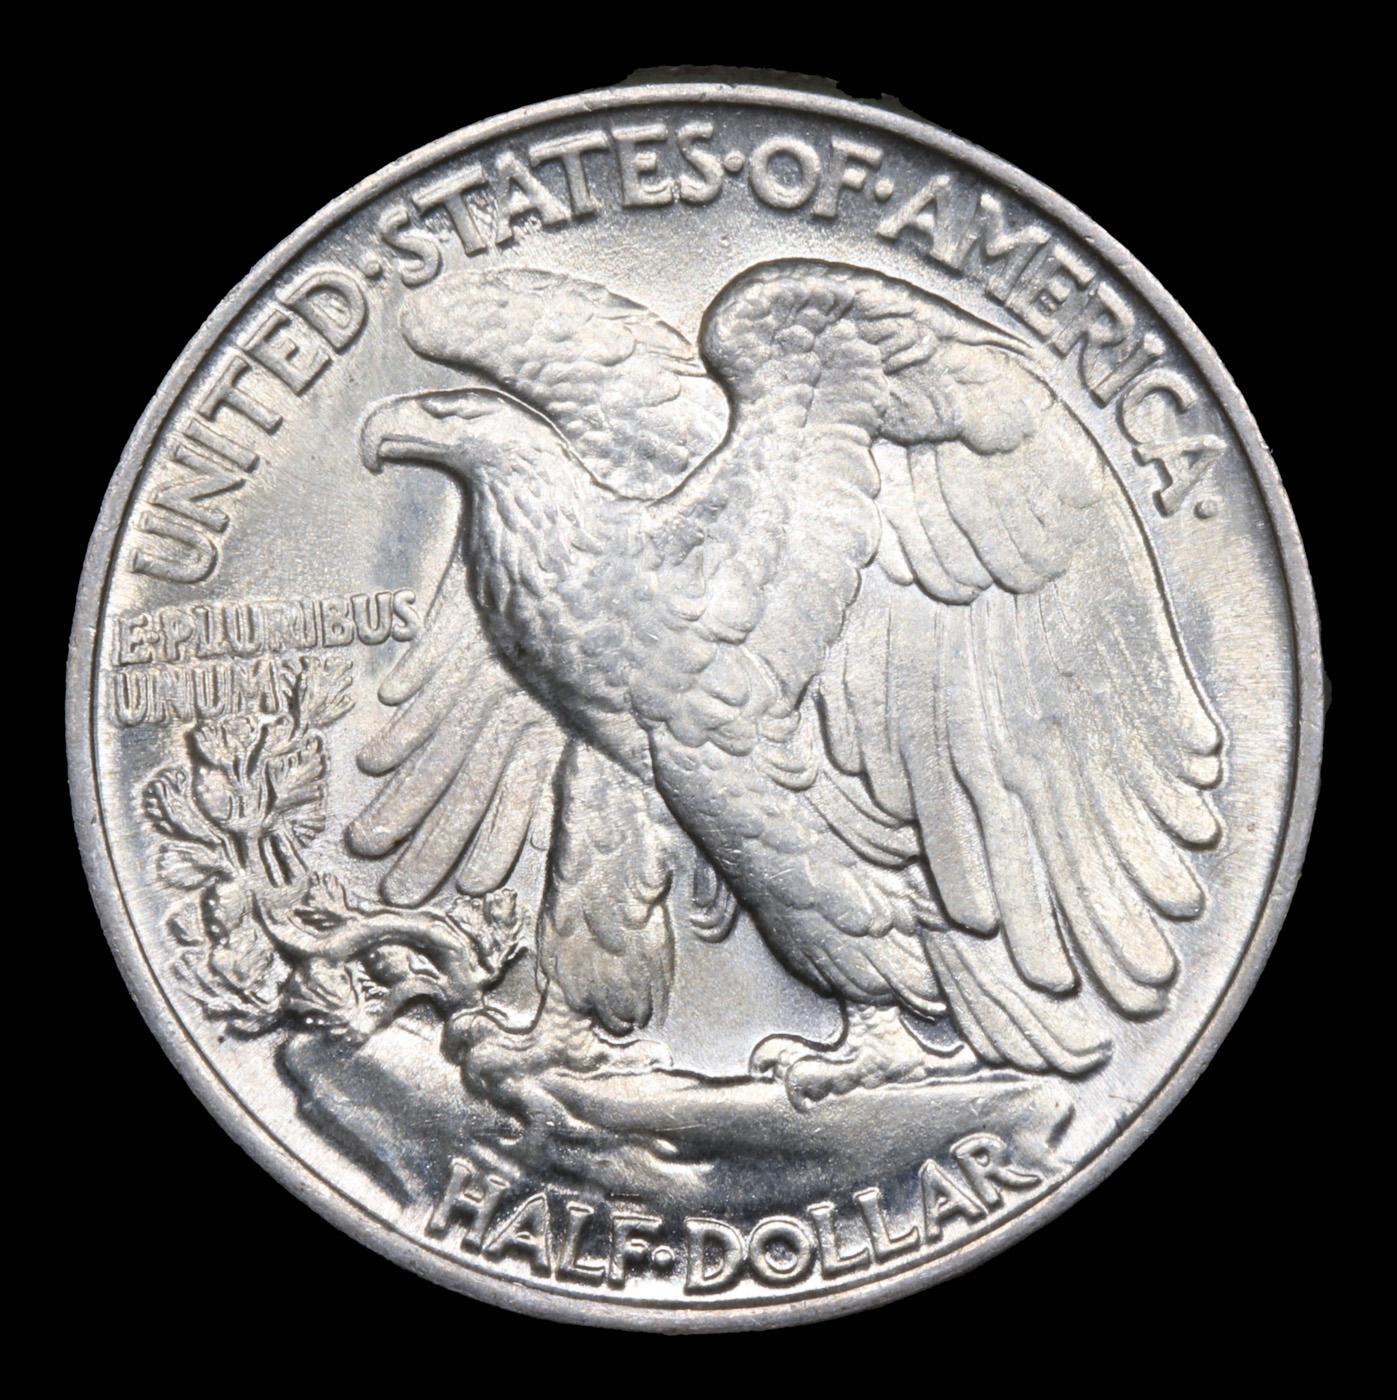 ***Auction Highlight*** 1945-p Walking Liberty Half Dollar FS-901 "No AW" 50c Graded ms65+ By SEGS (